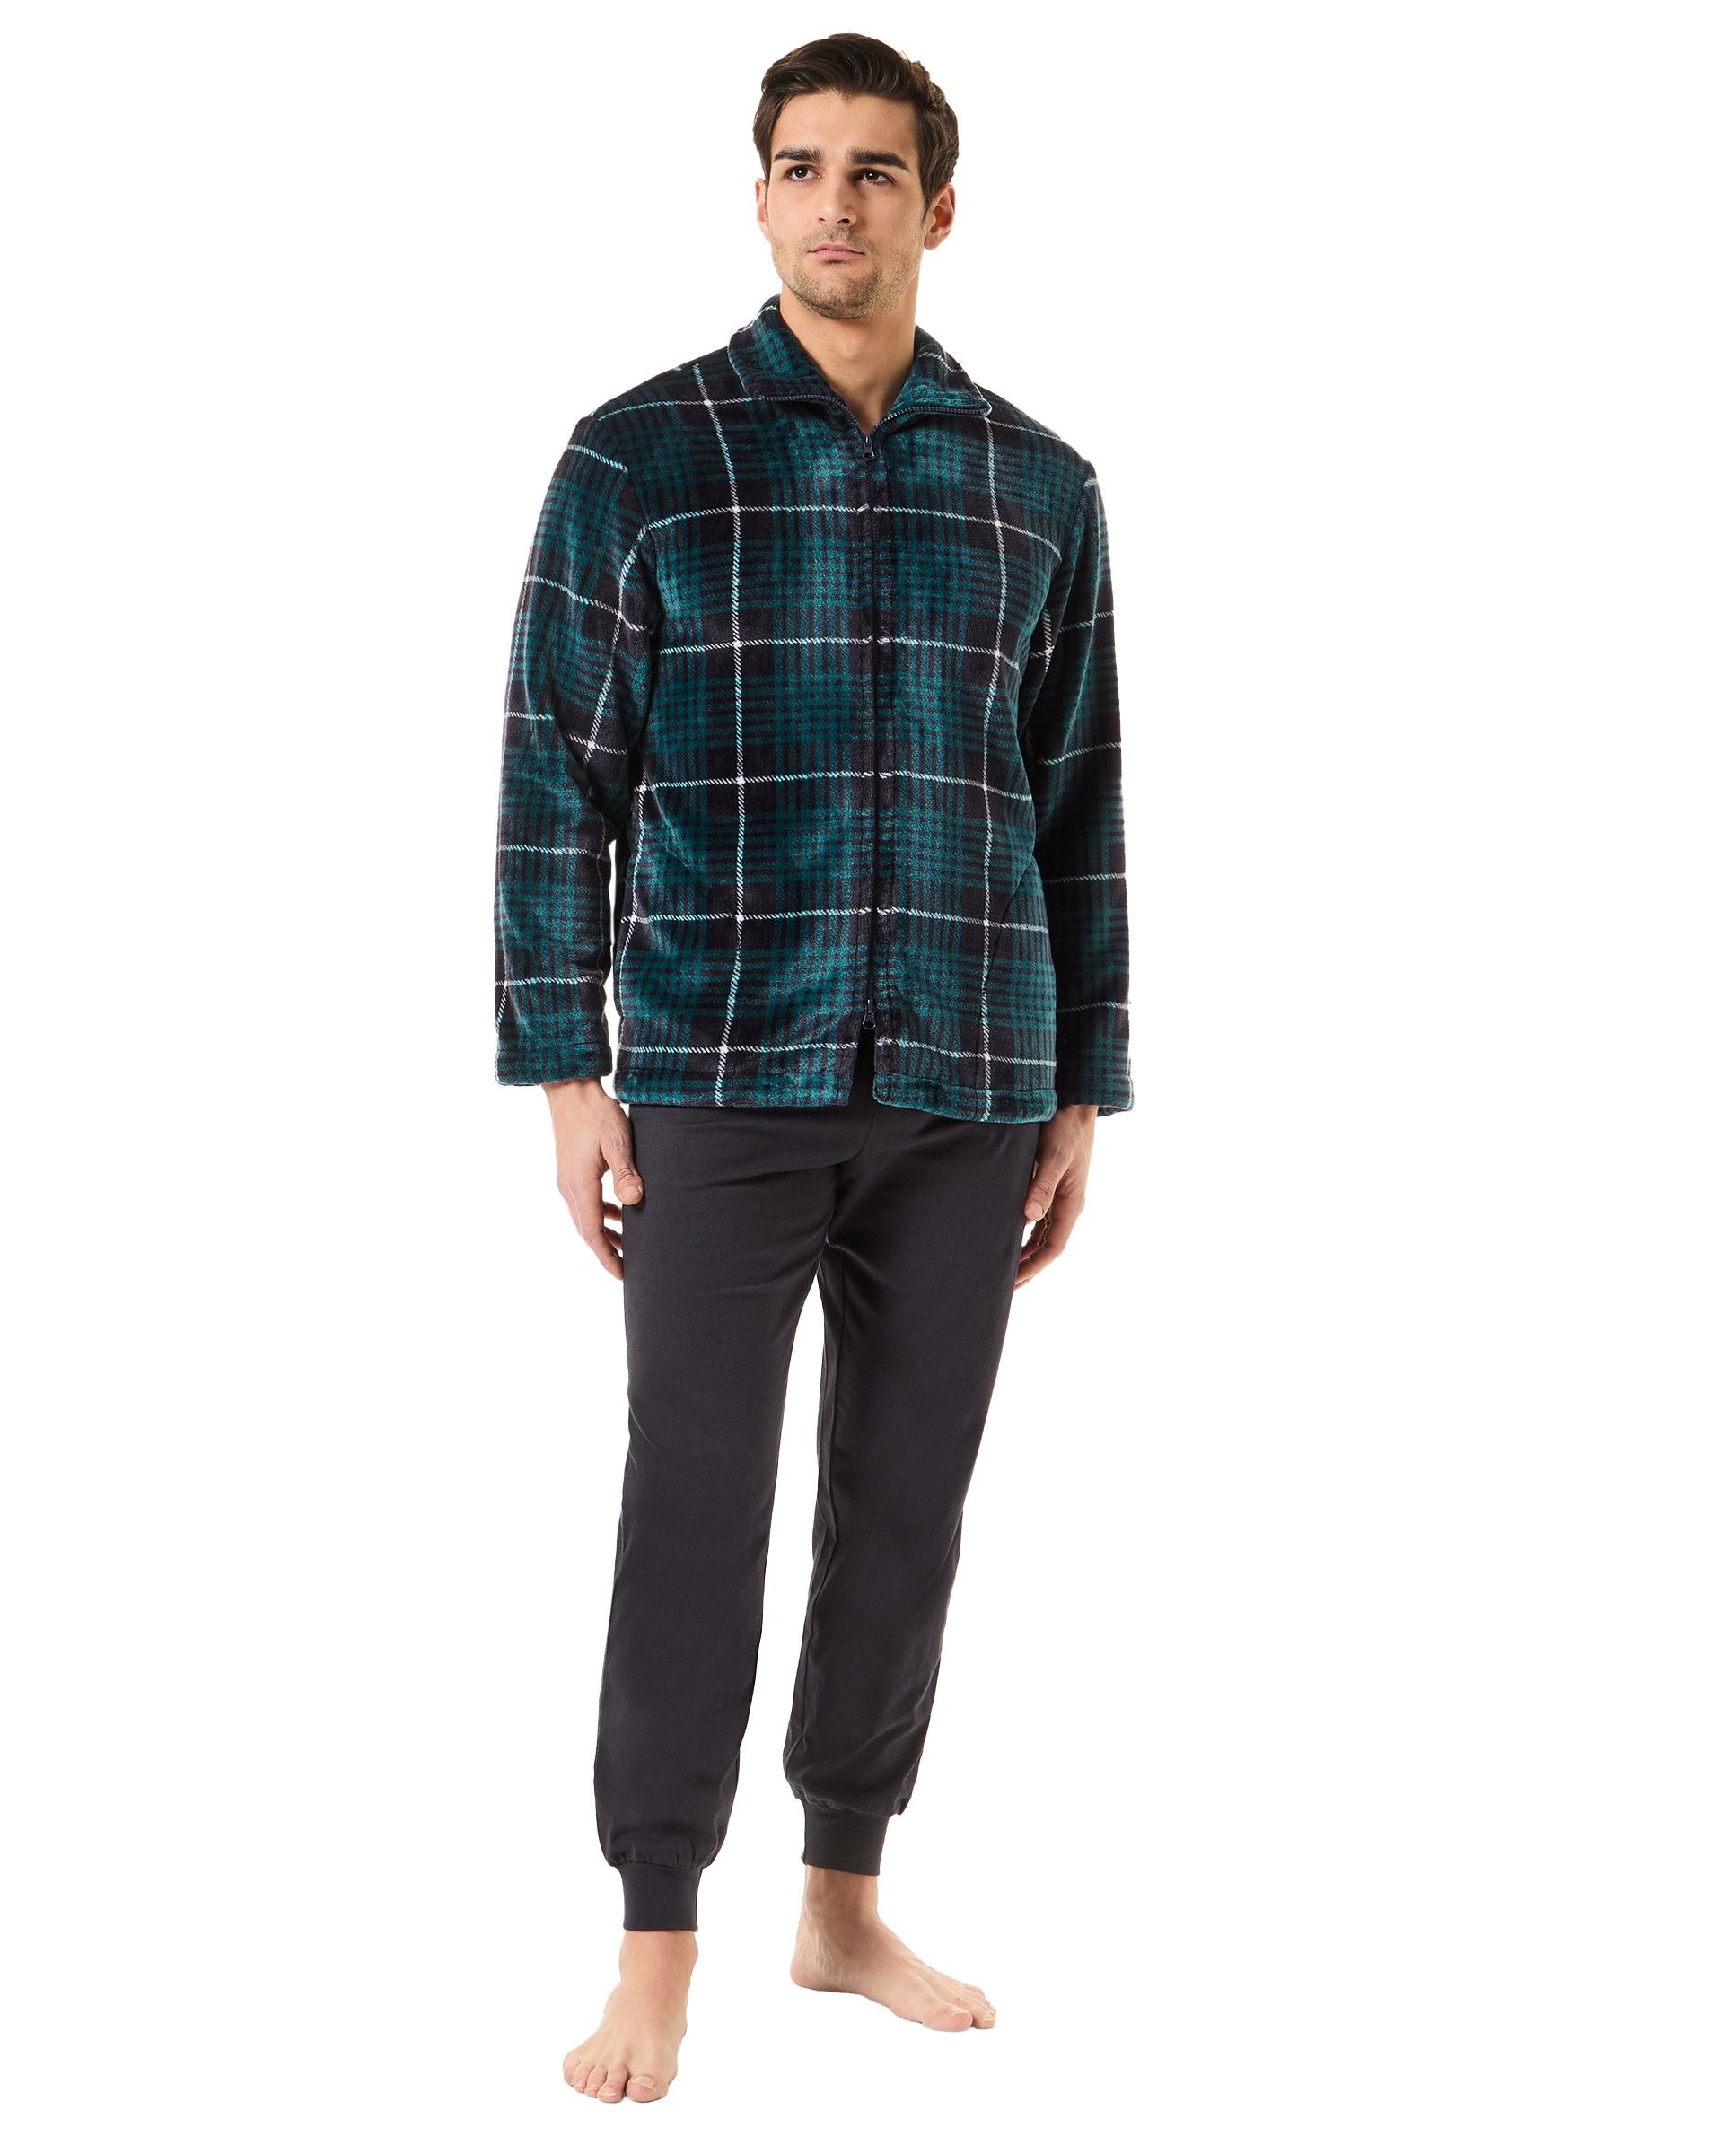 Men's short flannel dressing gown with zip and pockets